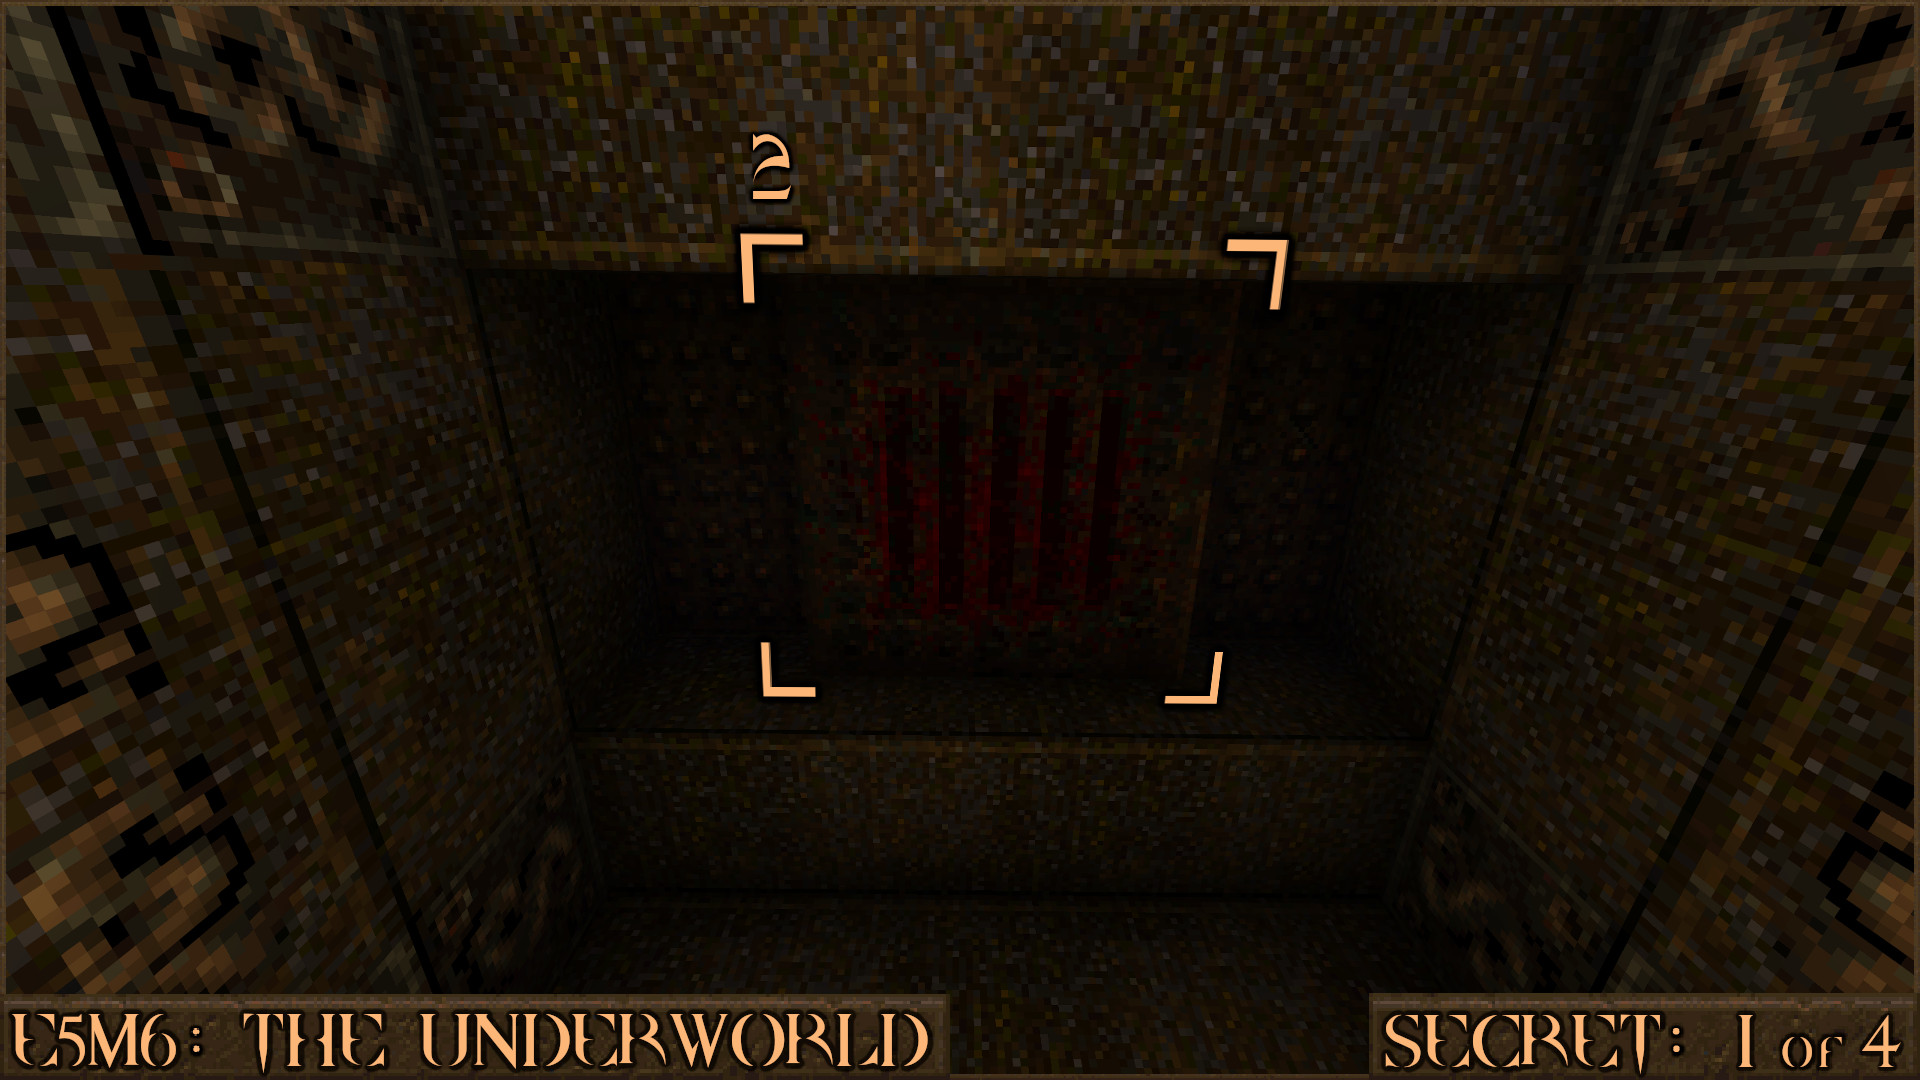 Quake Finding All Secrets in Quake Expansion pack: Dimension of the Past - E5M6: The Underworld - AB5A06B